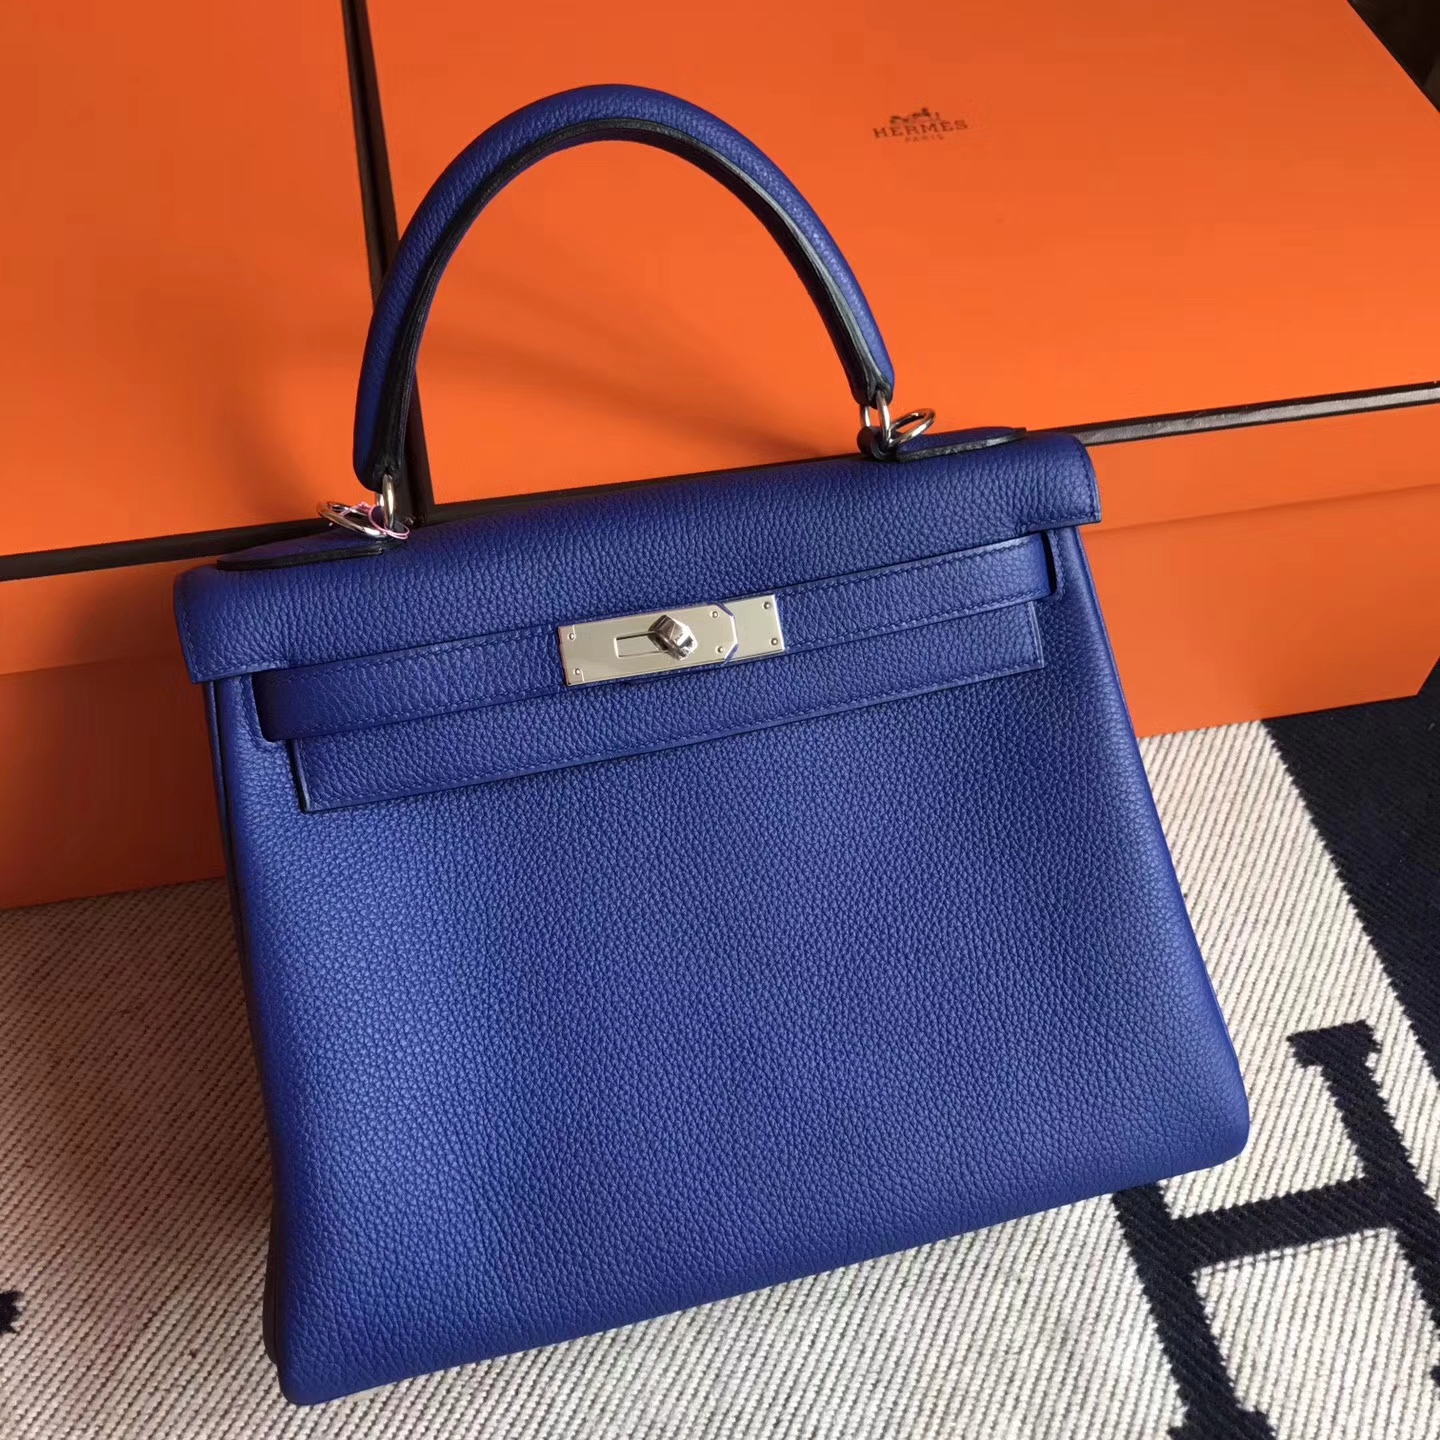 Fashion Hermes Togo Leather Kelly28cm Bag in 7T Blue Electric Silver ...